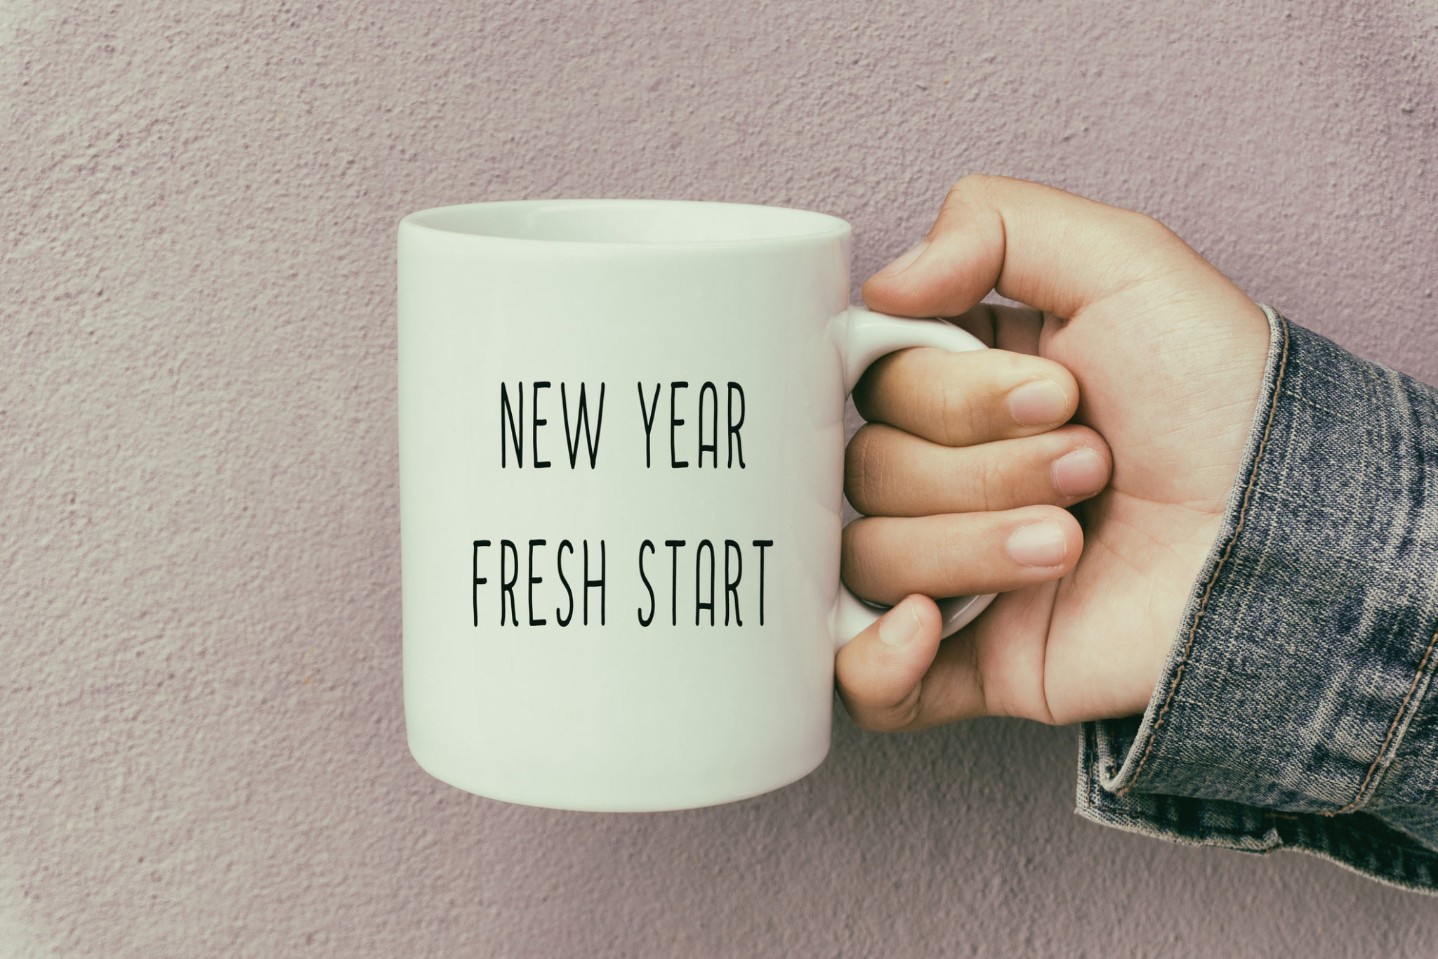 new-years-resolutions||resolutions jan1||iStock_000002025015_Small